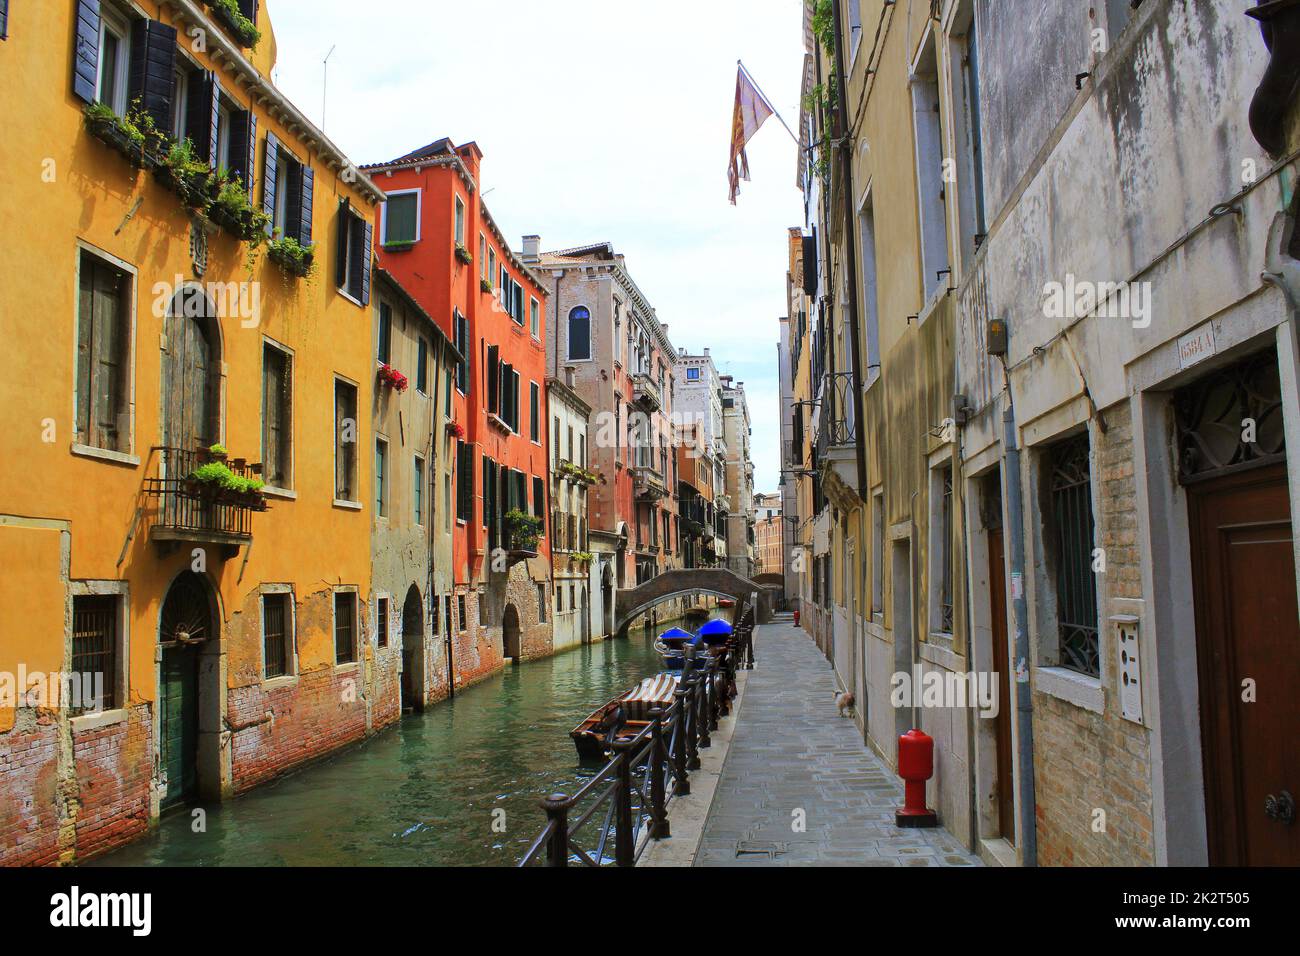 Canal in Venice, Italy. Exquisite buildings along Canals. Stock Photo